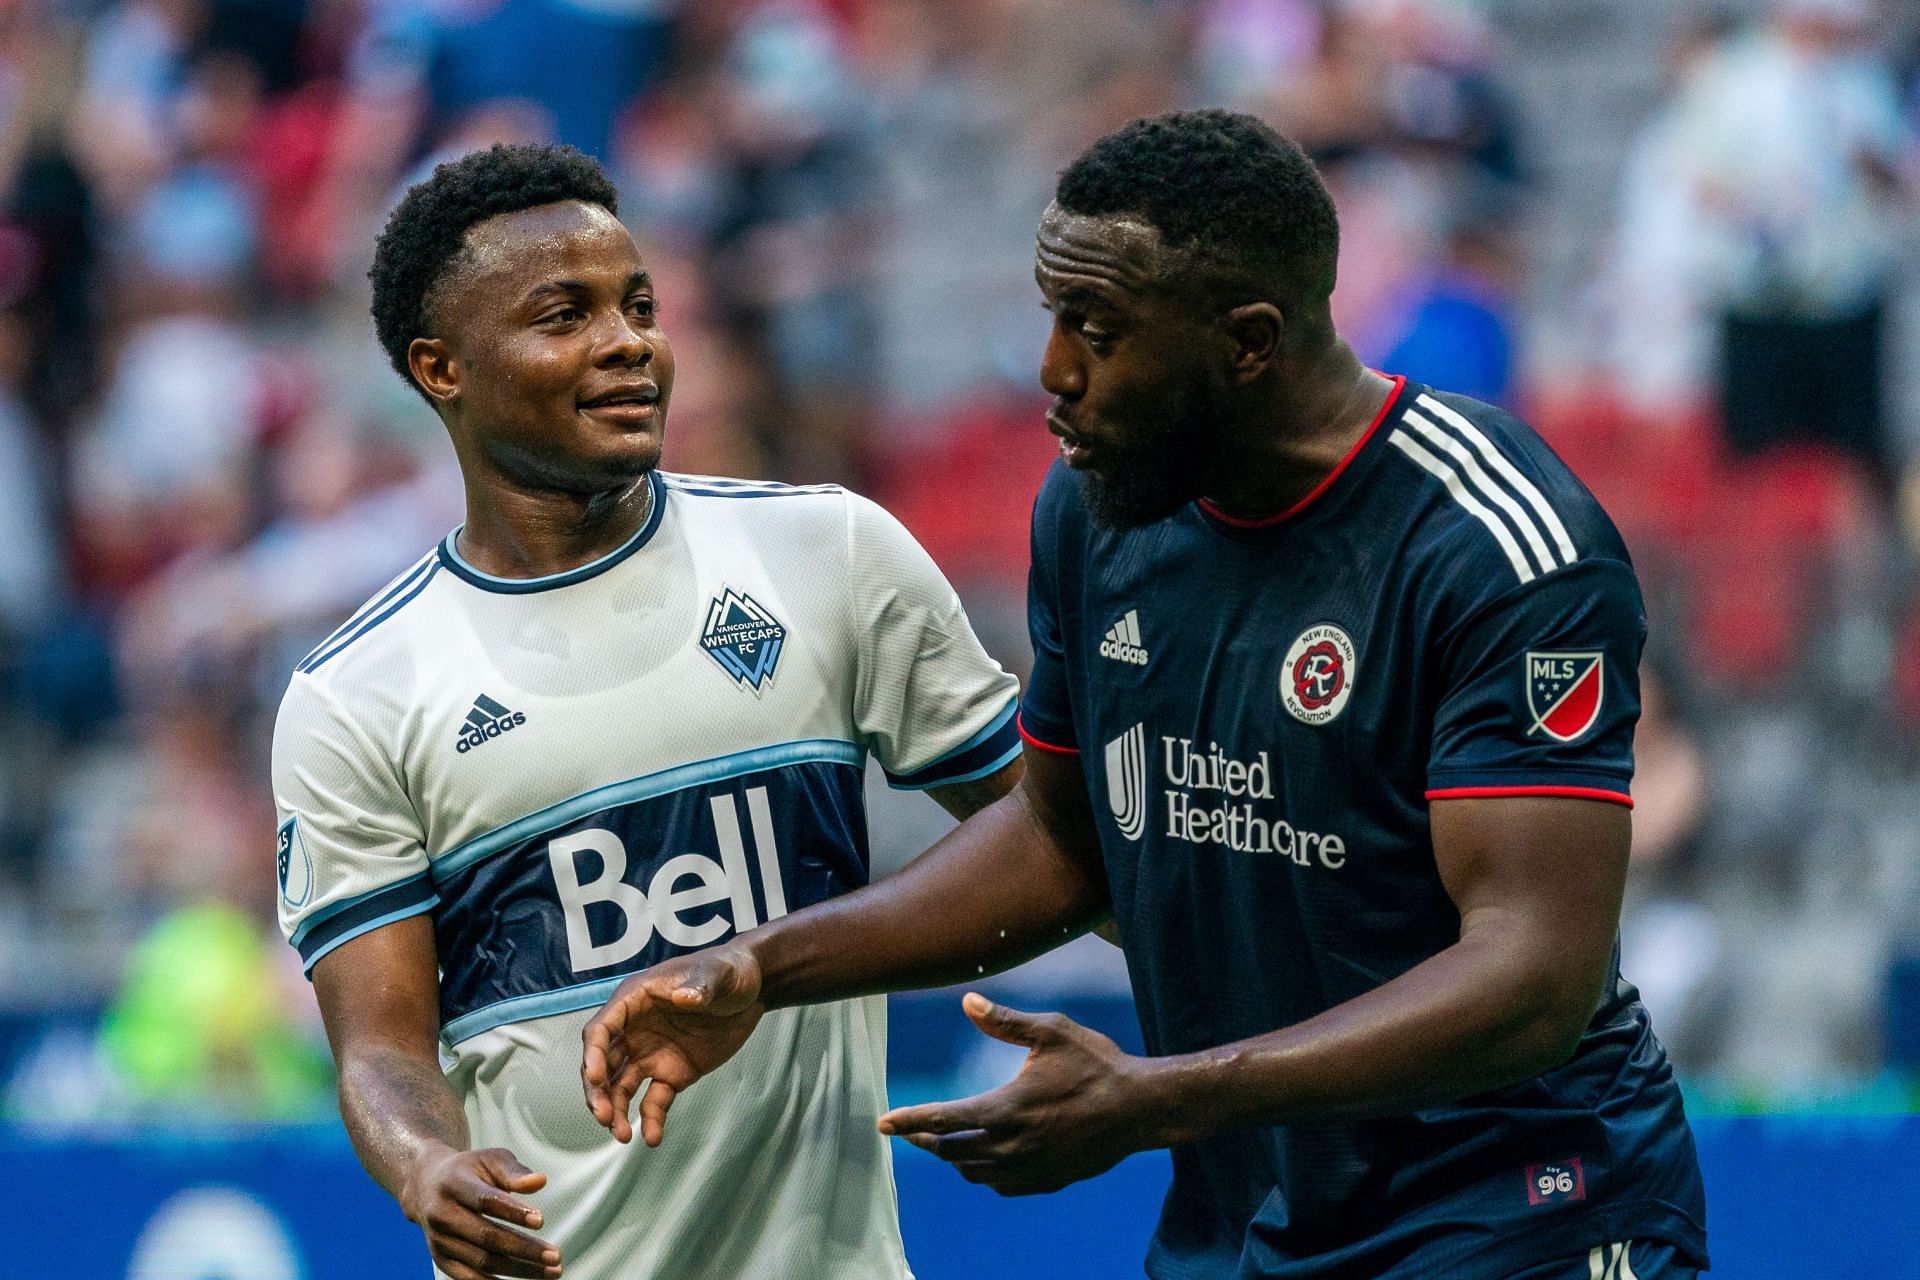 Vancouver Whitecaps need to win this game